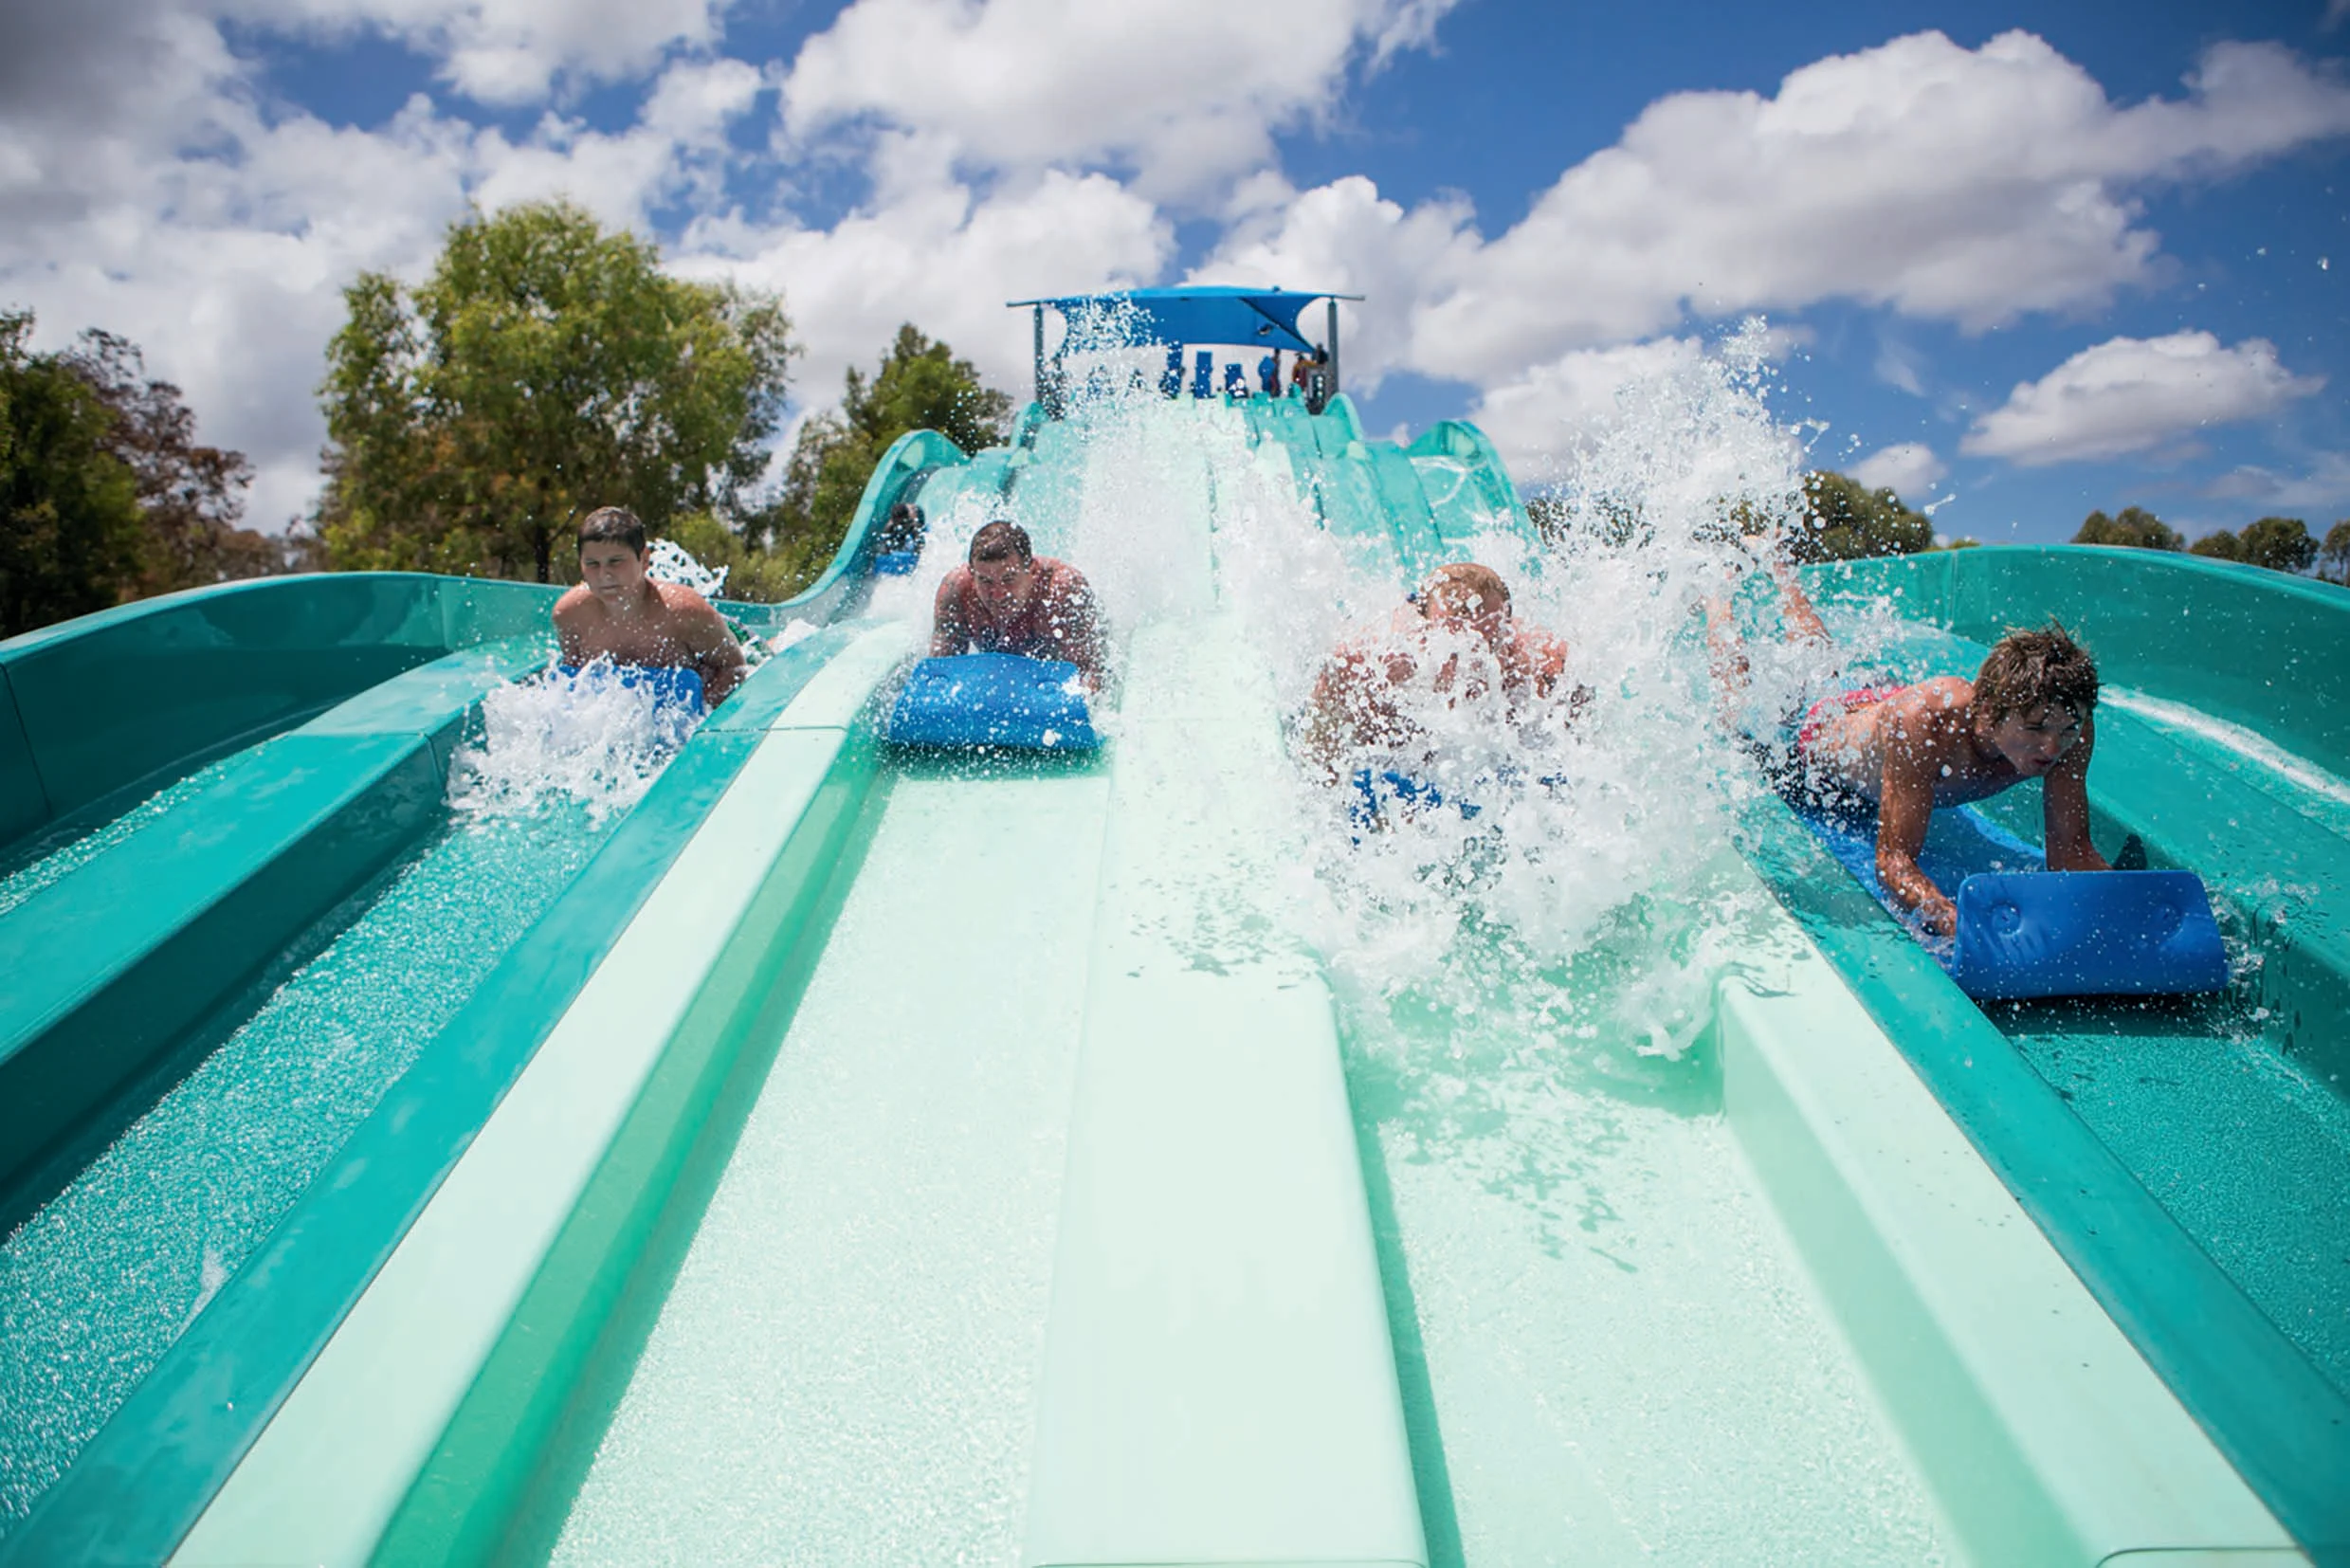 Adults and kids sliding down waterslides at Geelong Adventure Park, Victoria